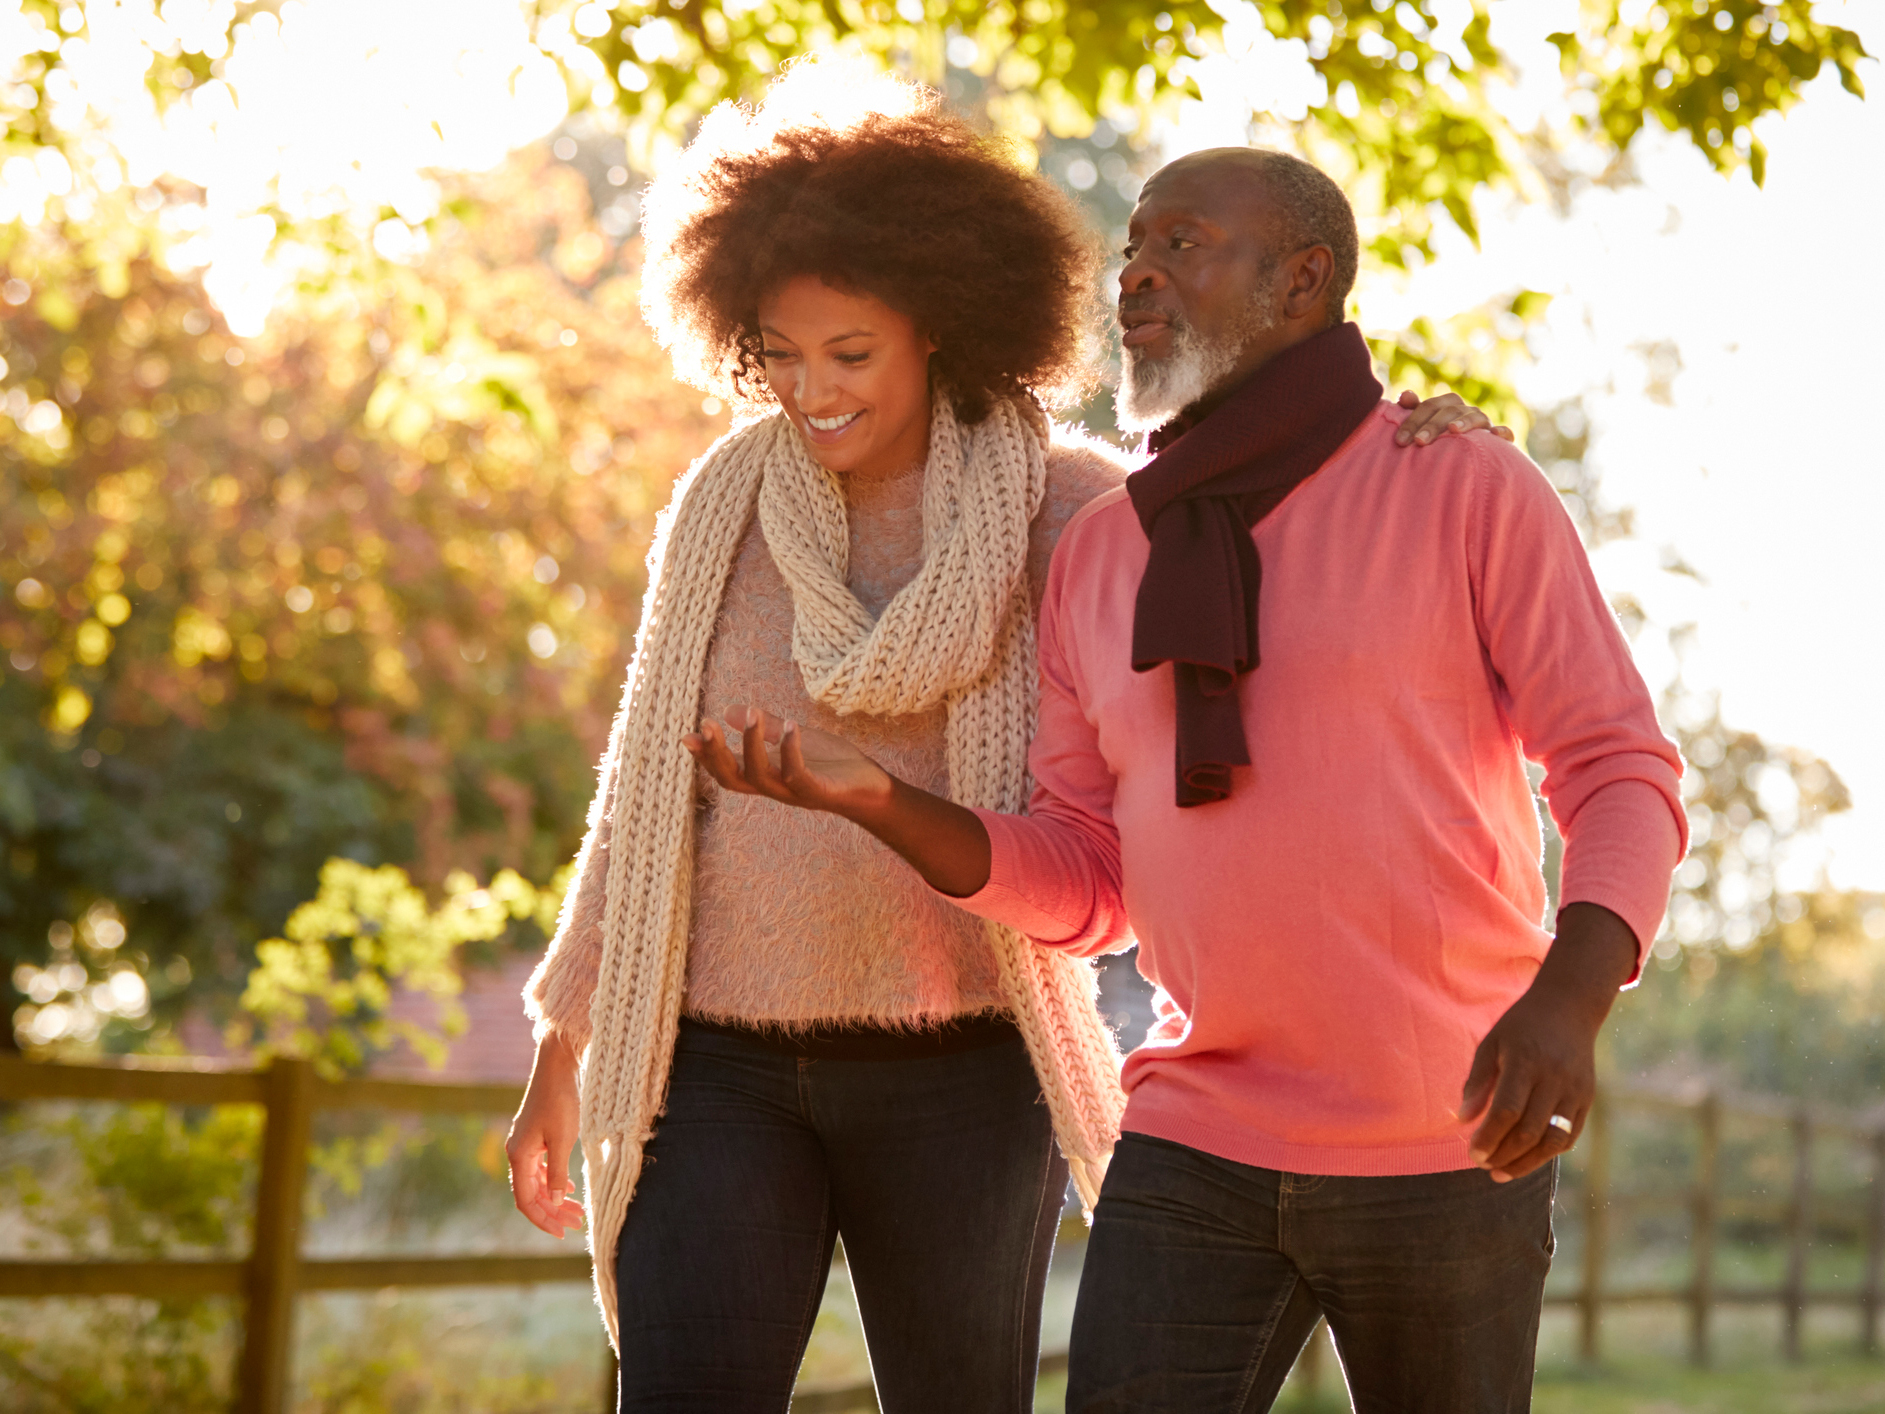 After-dinner walks control blood sugar, more - Easy Health Options®